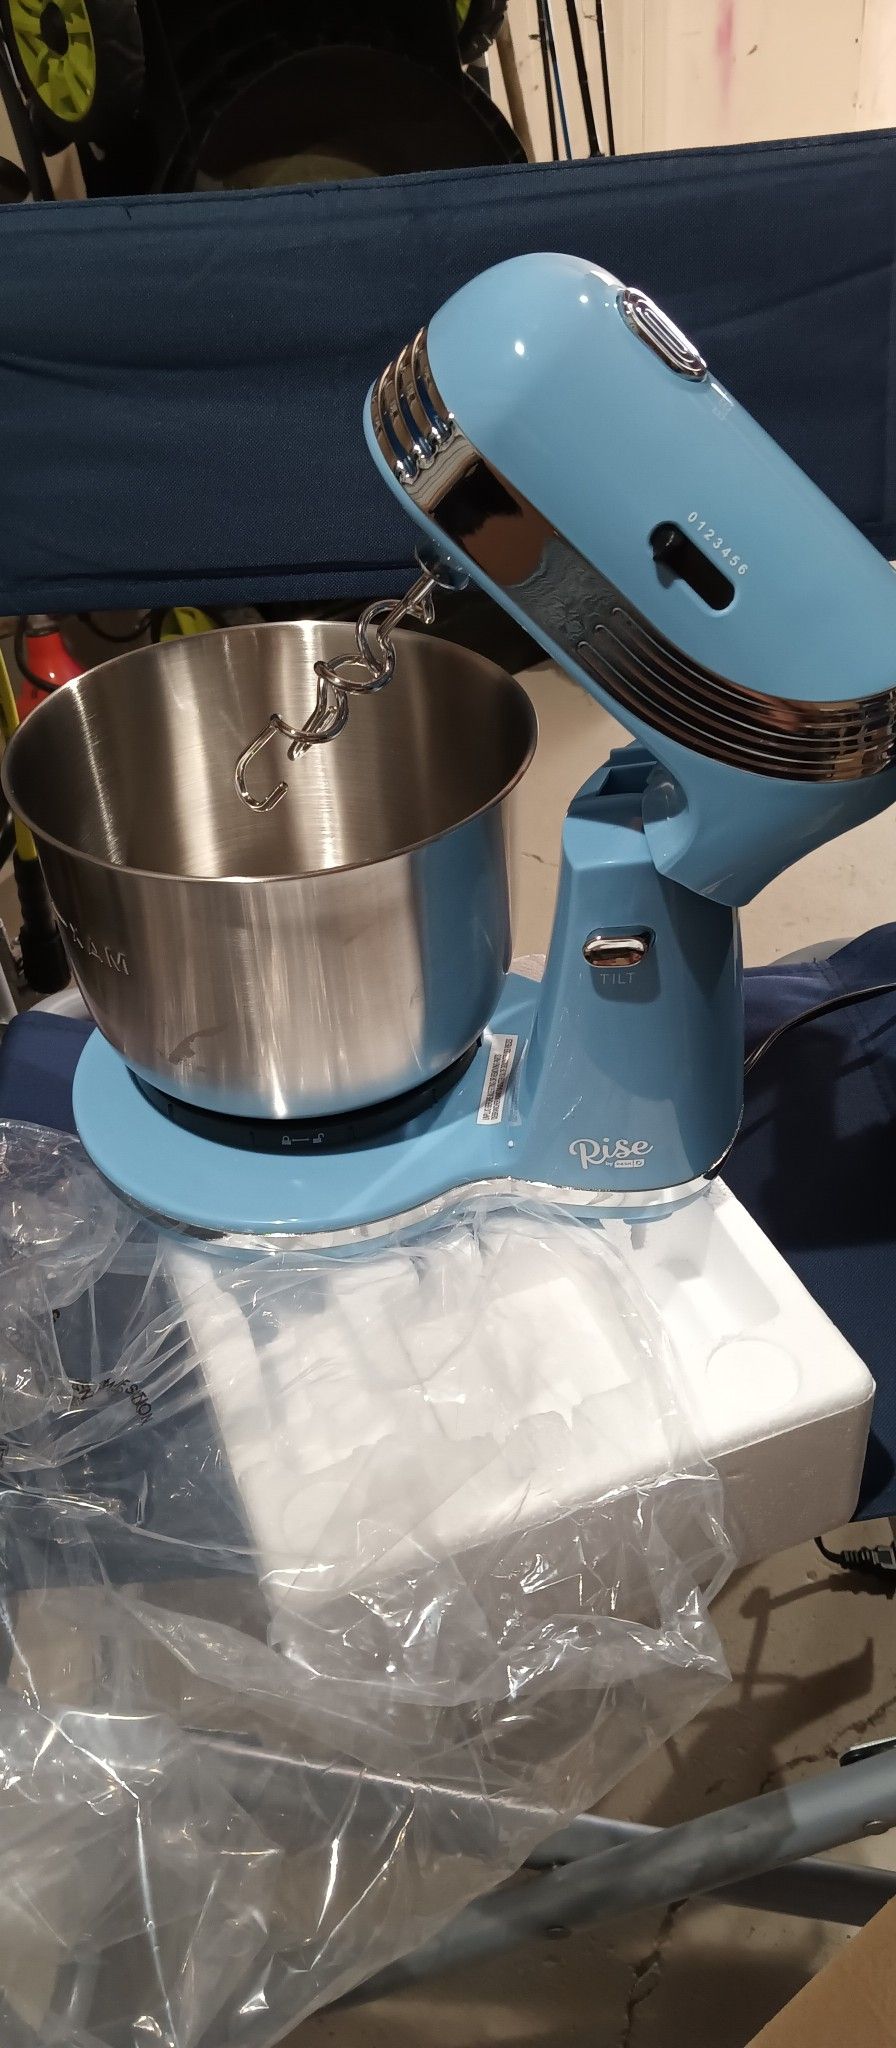 Rise by Dash 6 Speed Stand Mixer, 3 Qt - Sky Blue - 